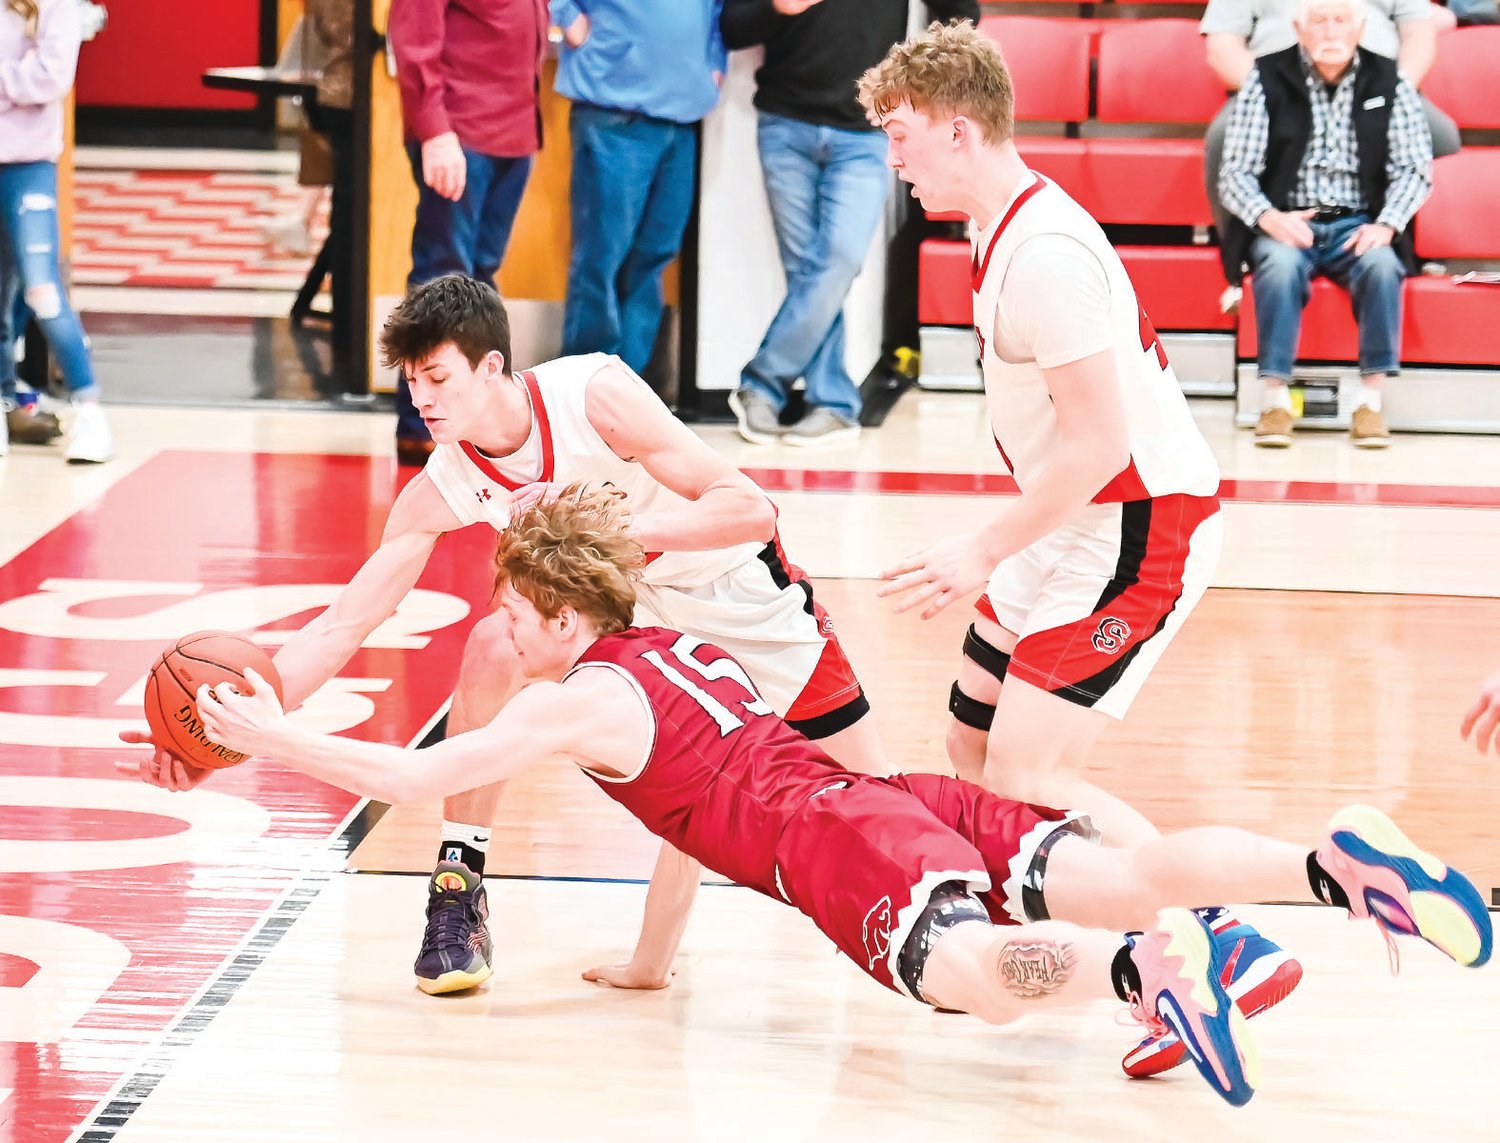 Senior Zach Dodson dives for a loose ball. He posted 11 points and 10 rebounds on the night.